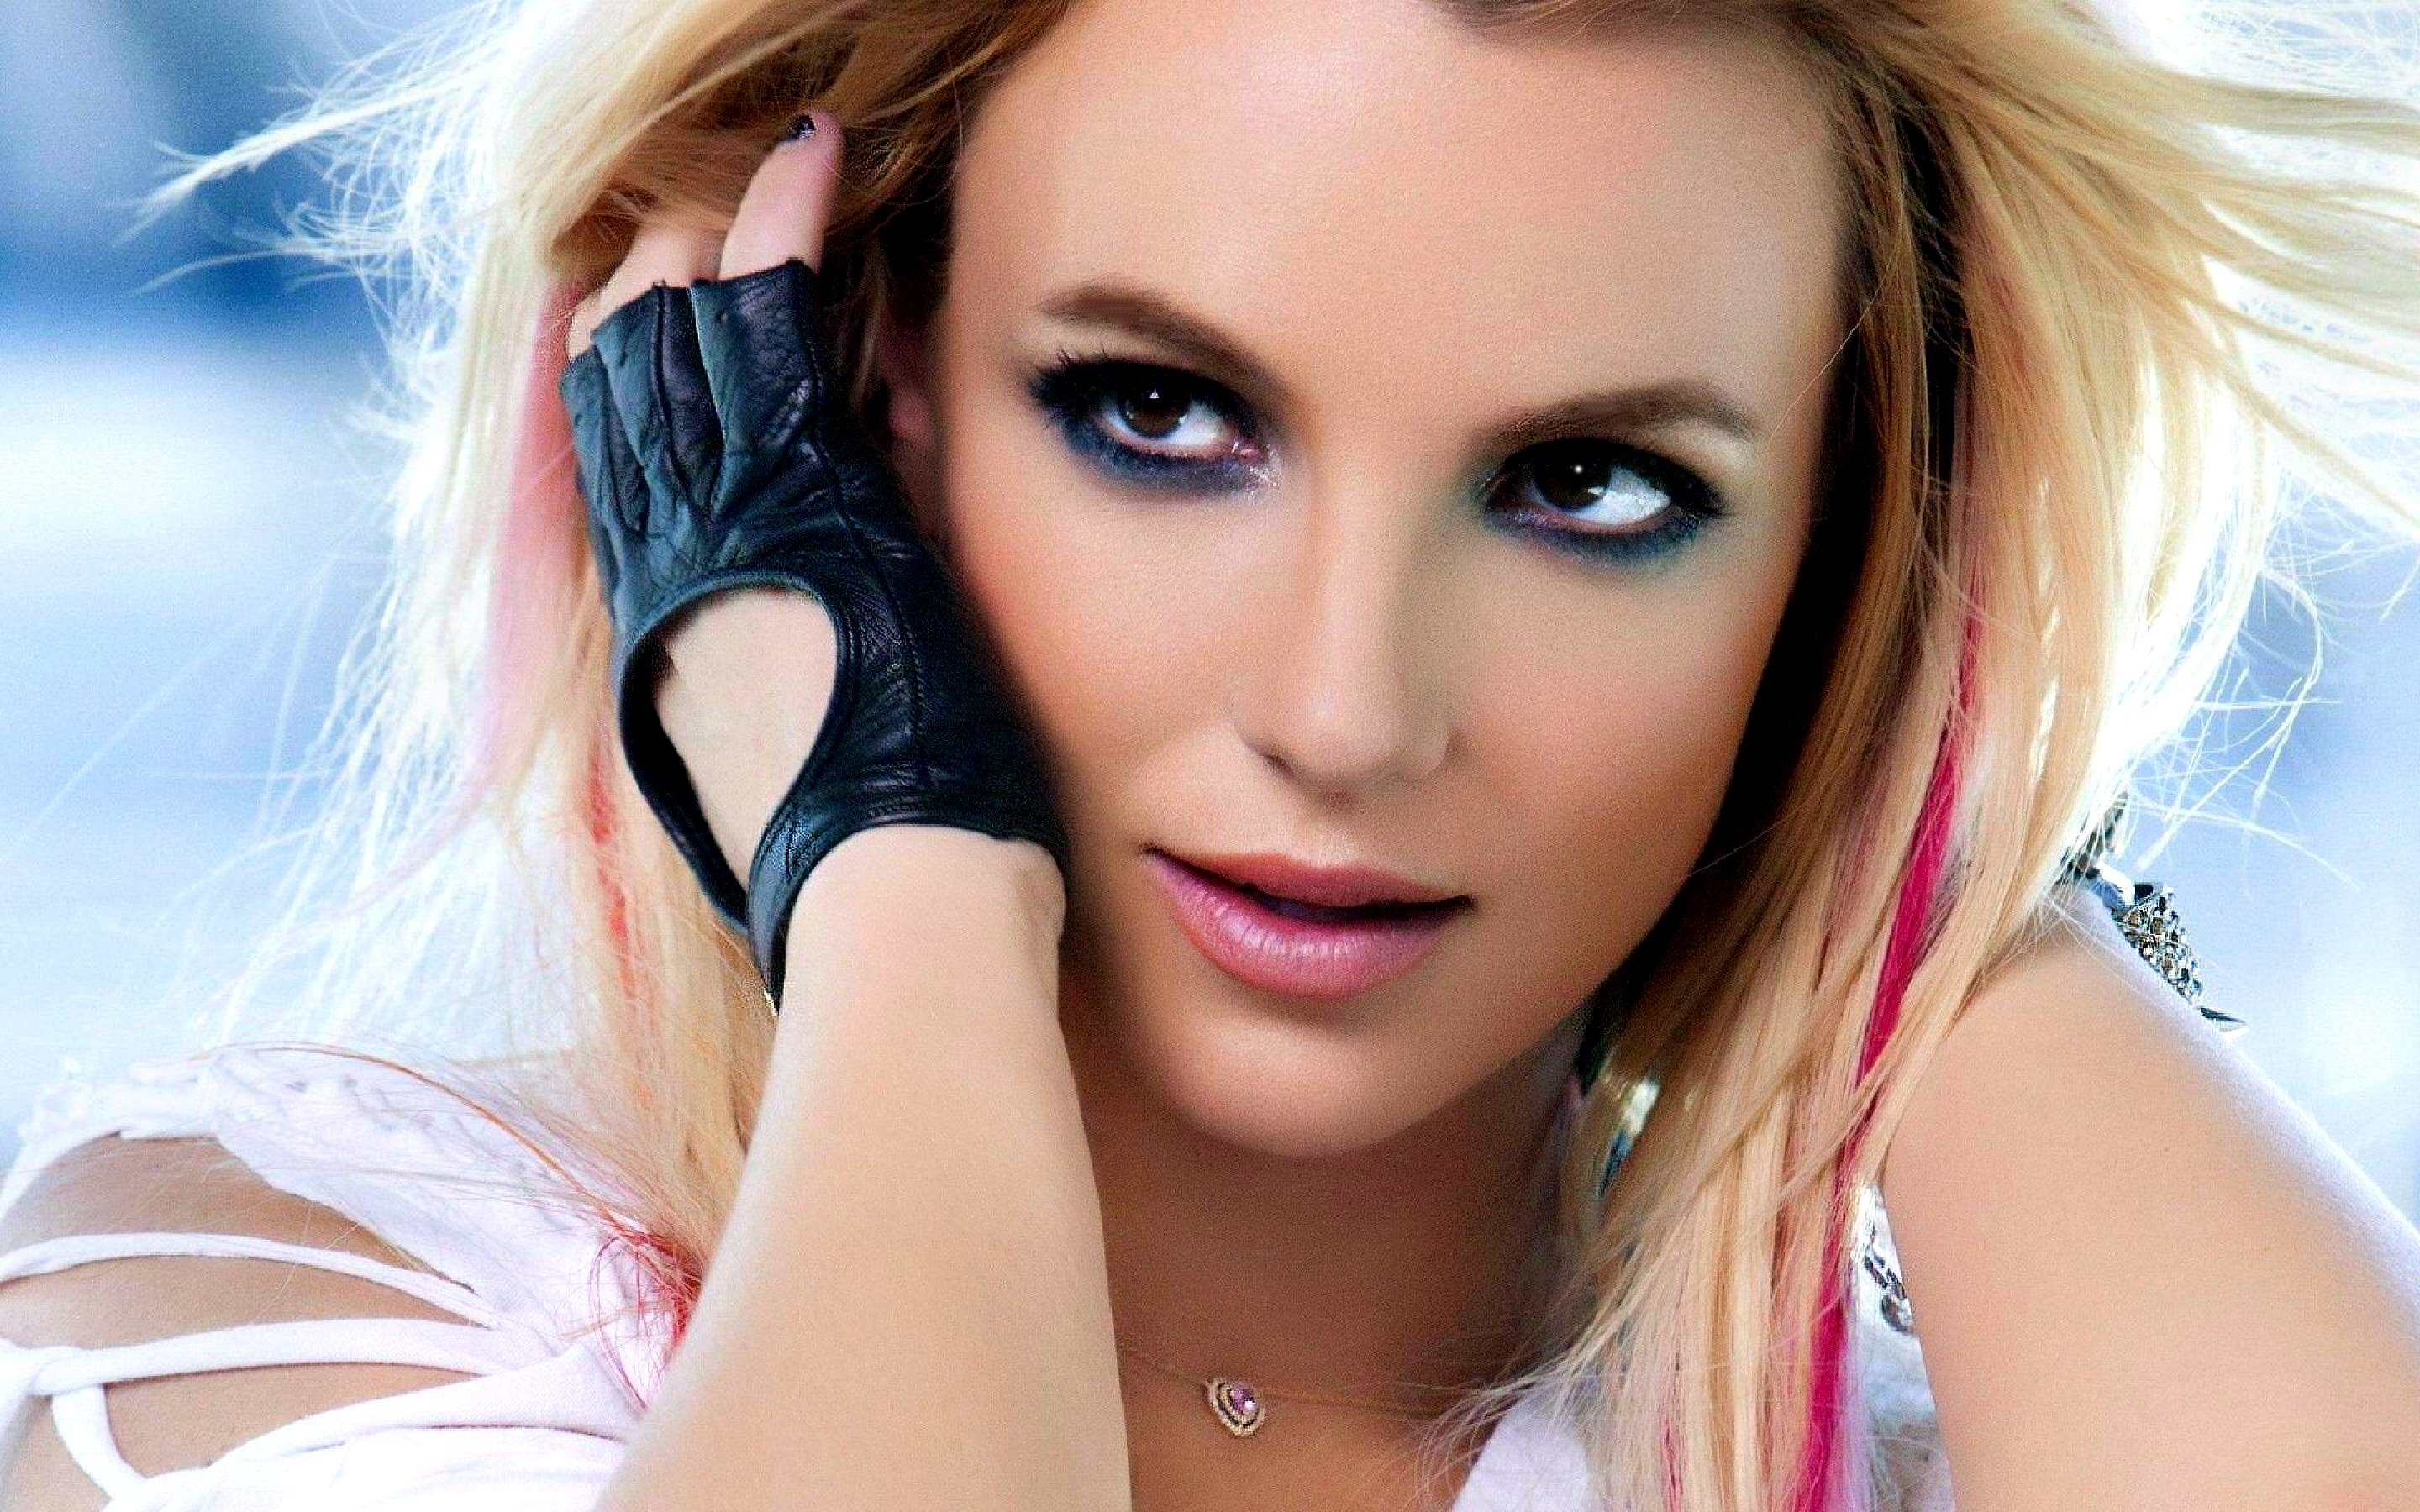  Britney Spears Cellphone FHD pic